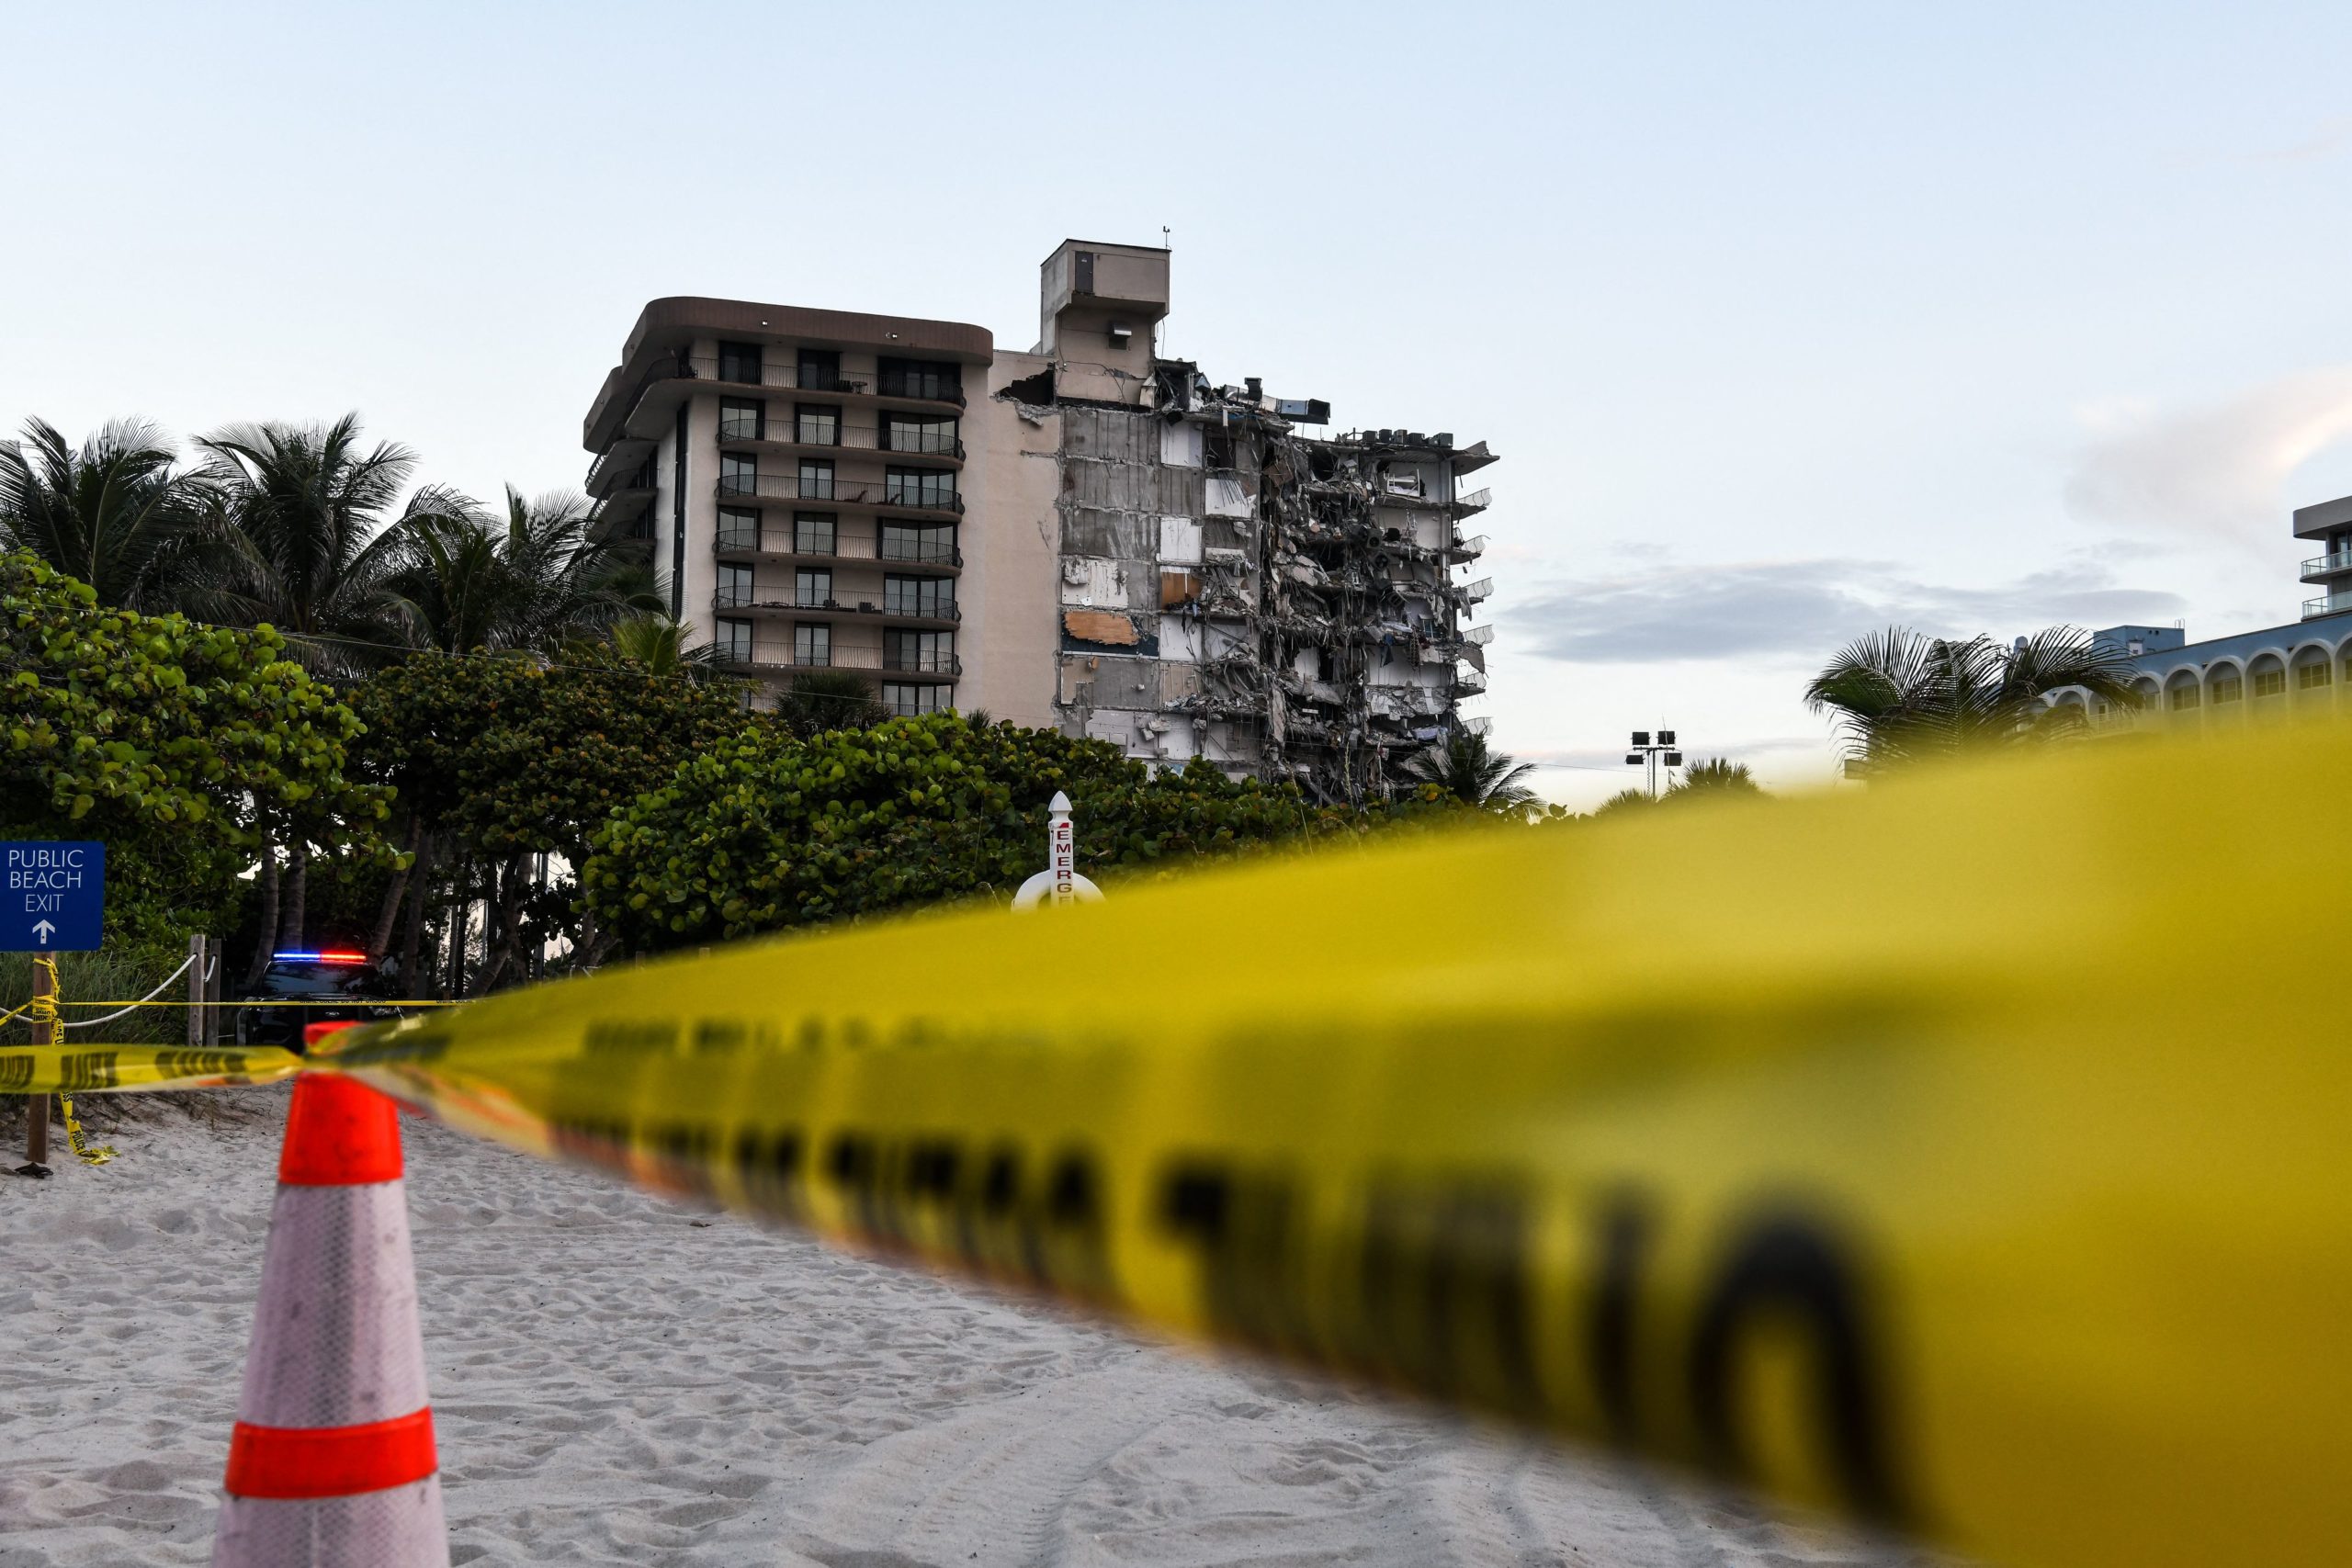 Police tape blocks access to a partially collapsed building in Surfside north of Miami Beach, on June 24, 2021. (Photo by CHANDAN KHANNA/AFP via Getty Images)